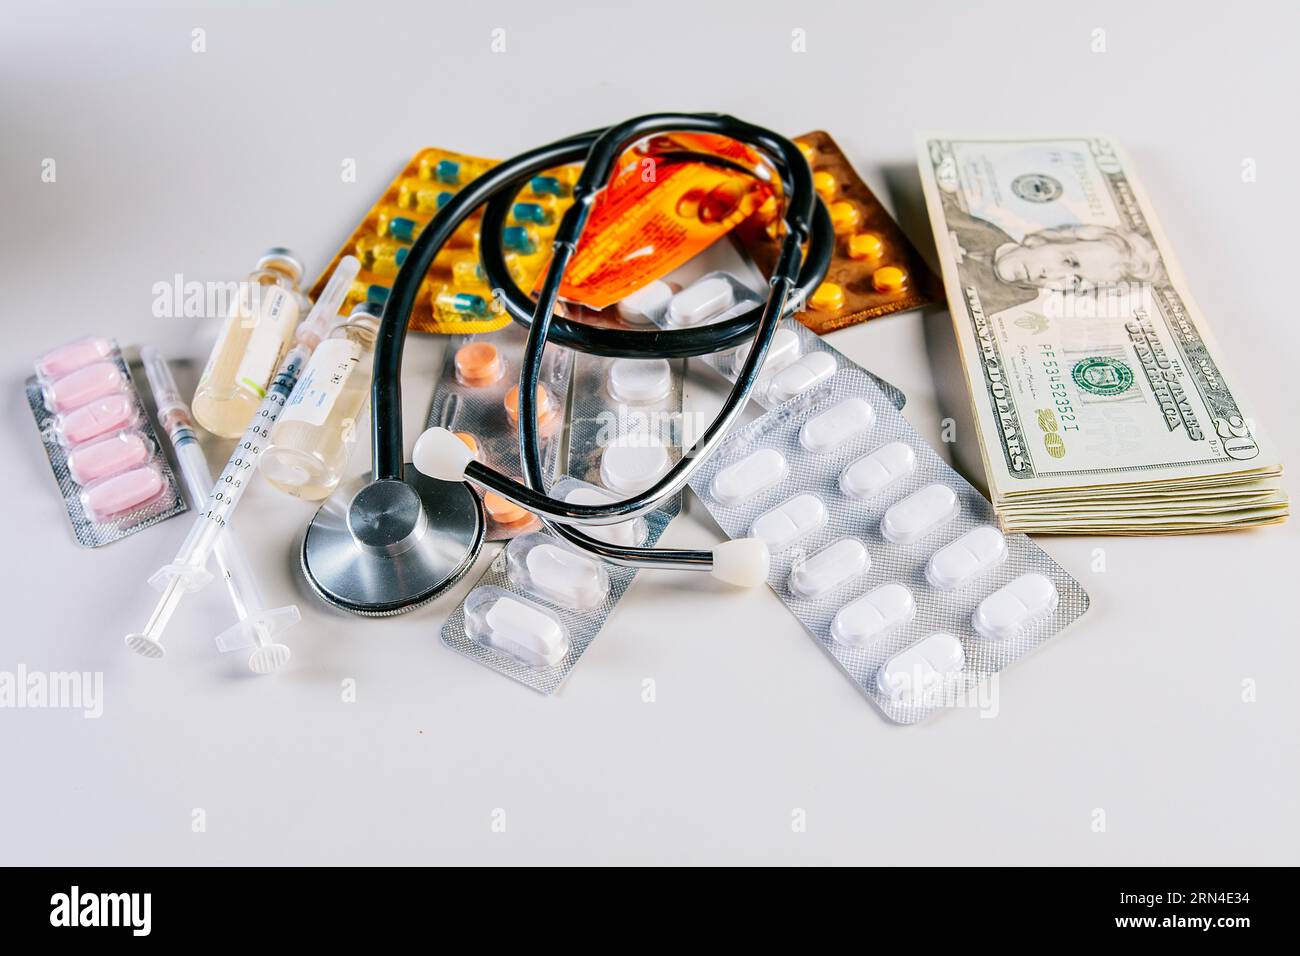 Concept of medicine, stethoscope, money and drug addiction. Medical stethoscope with medicaments on money Stock Photo